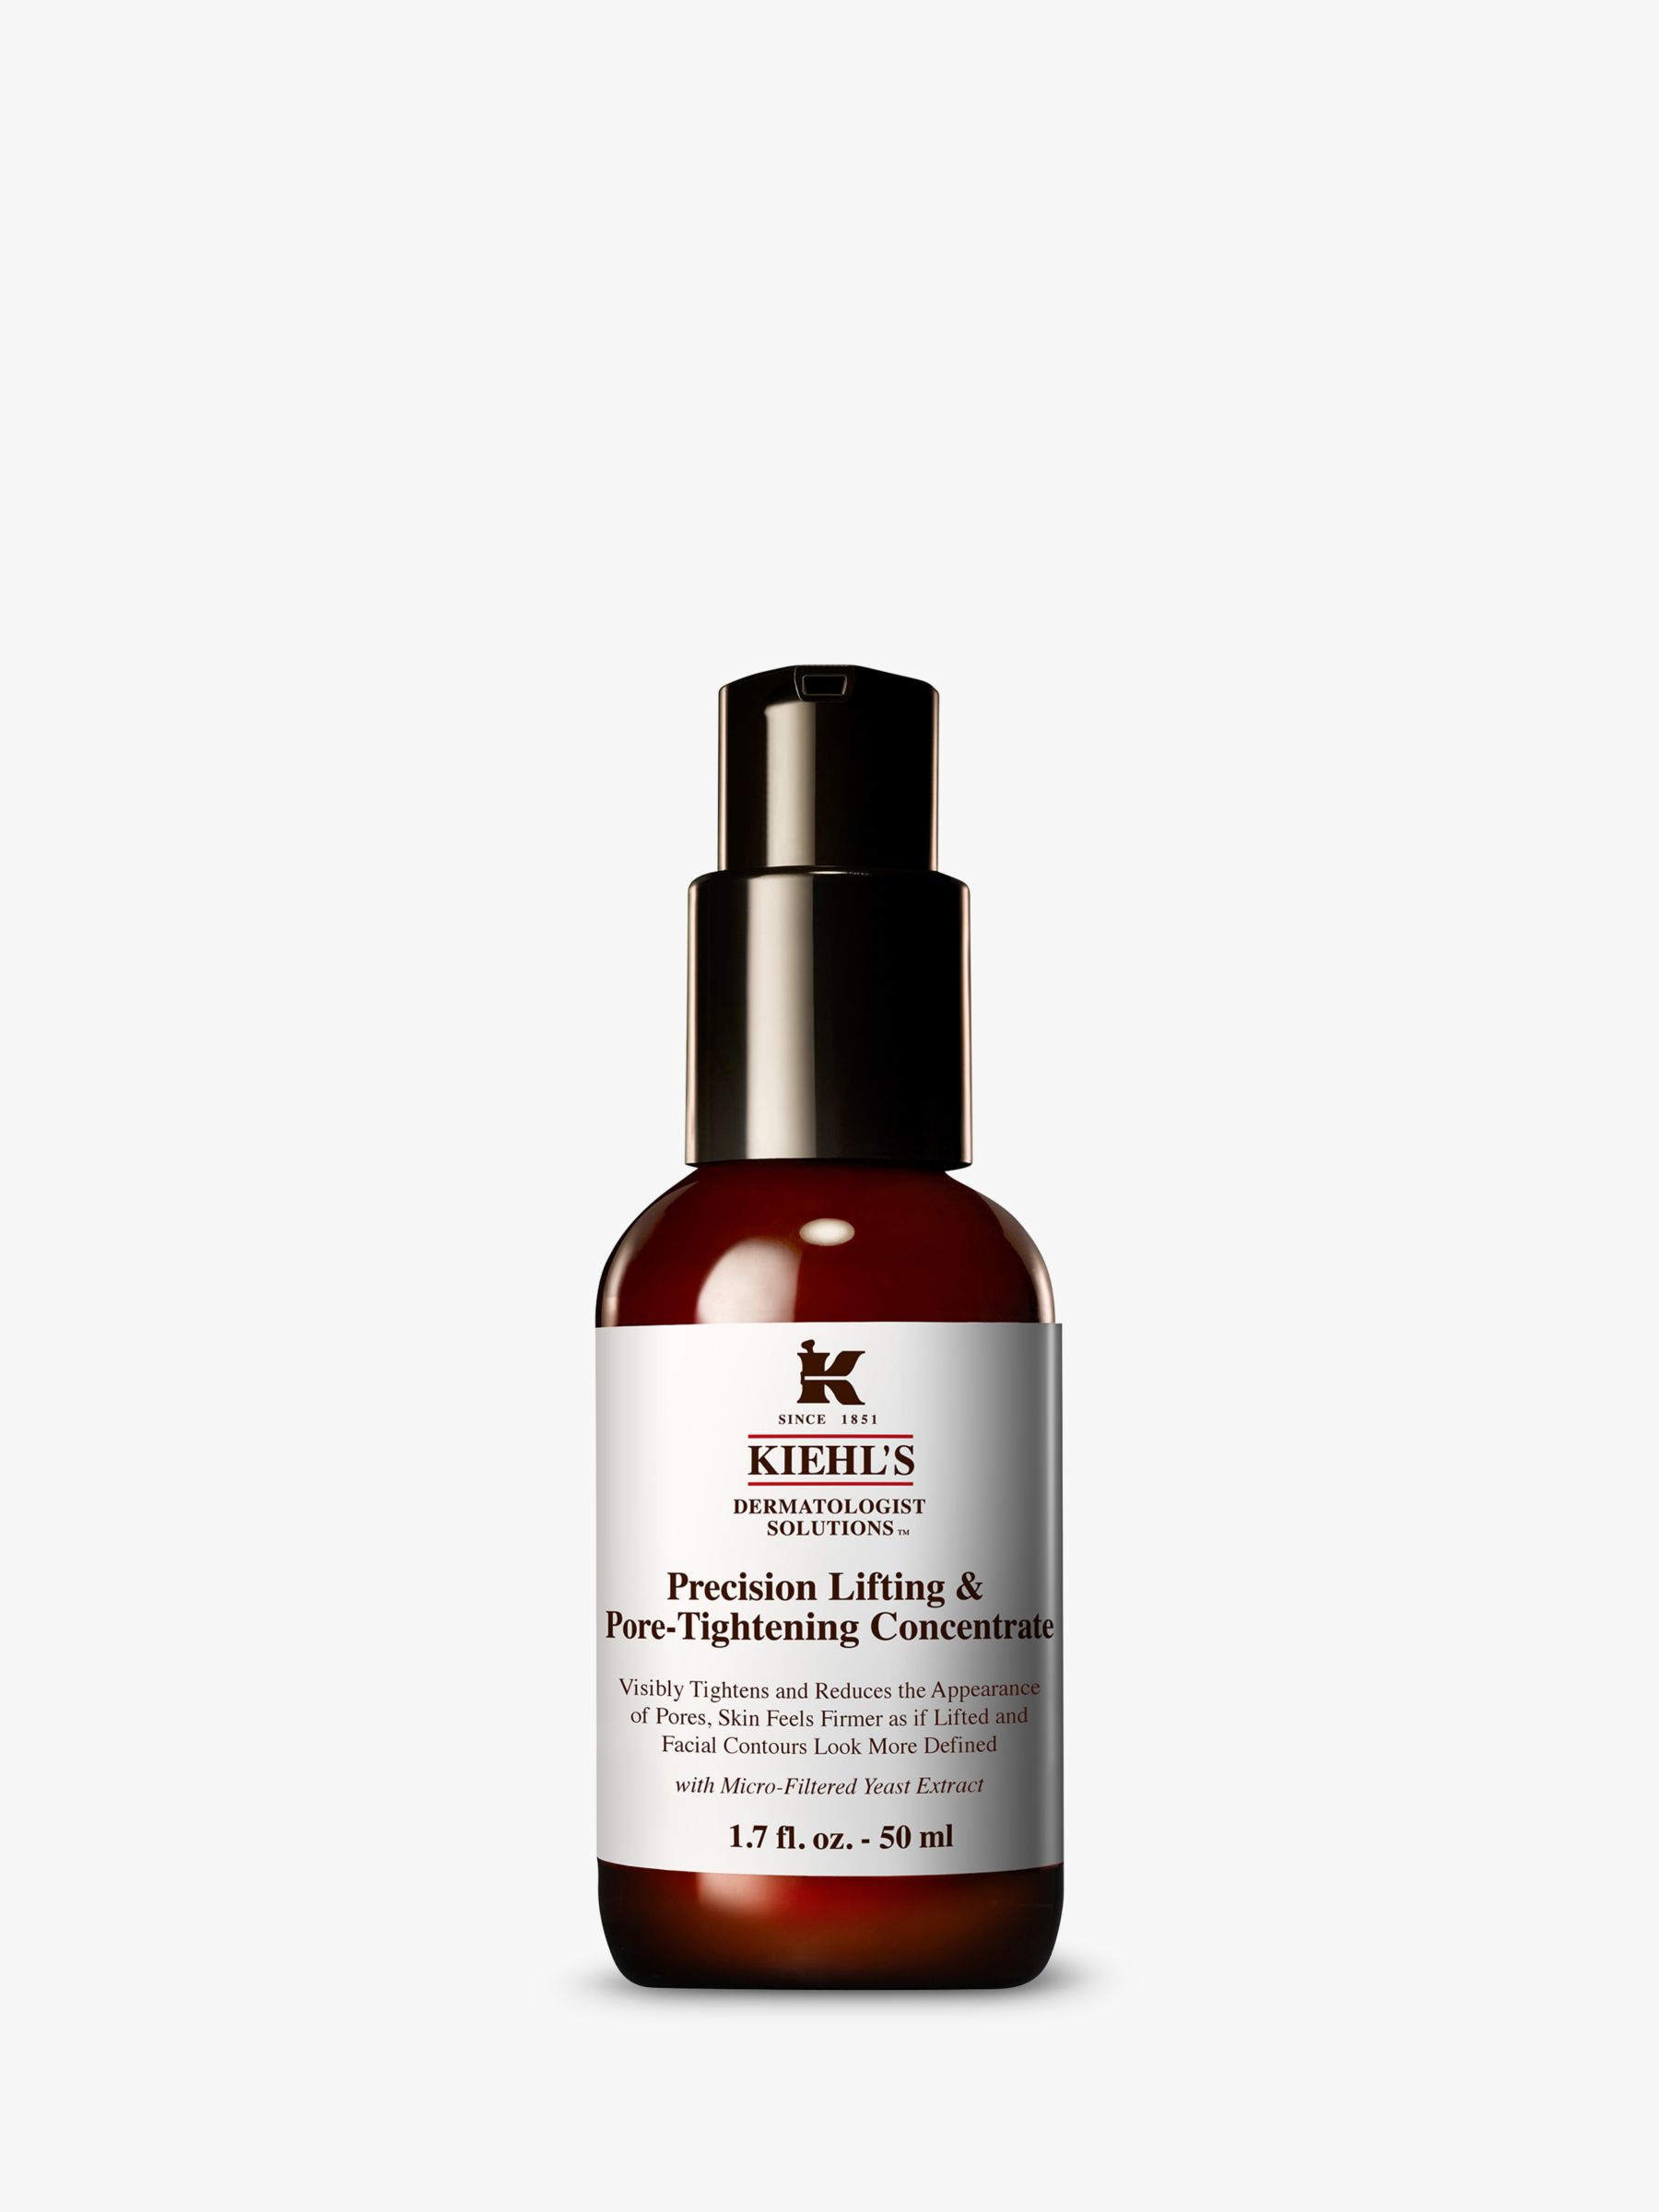 Kiehl's Precision Lifting & Pore-Tightening Concentrate Serum, 50ml at ...